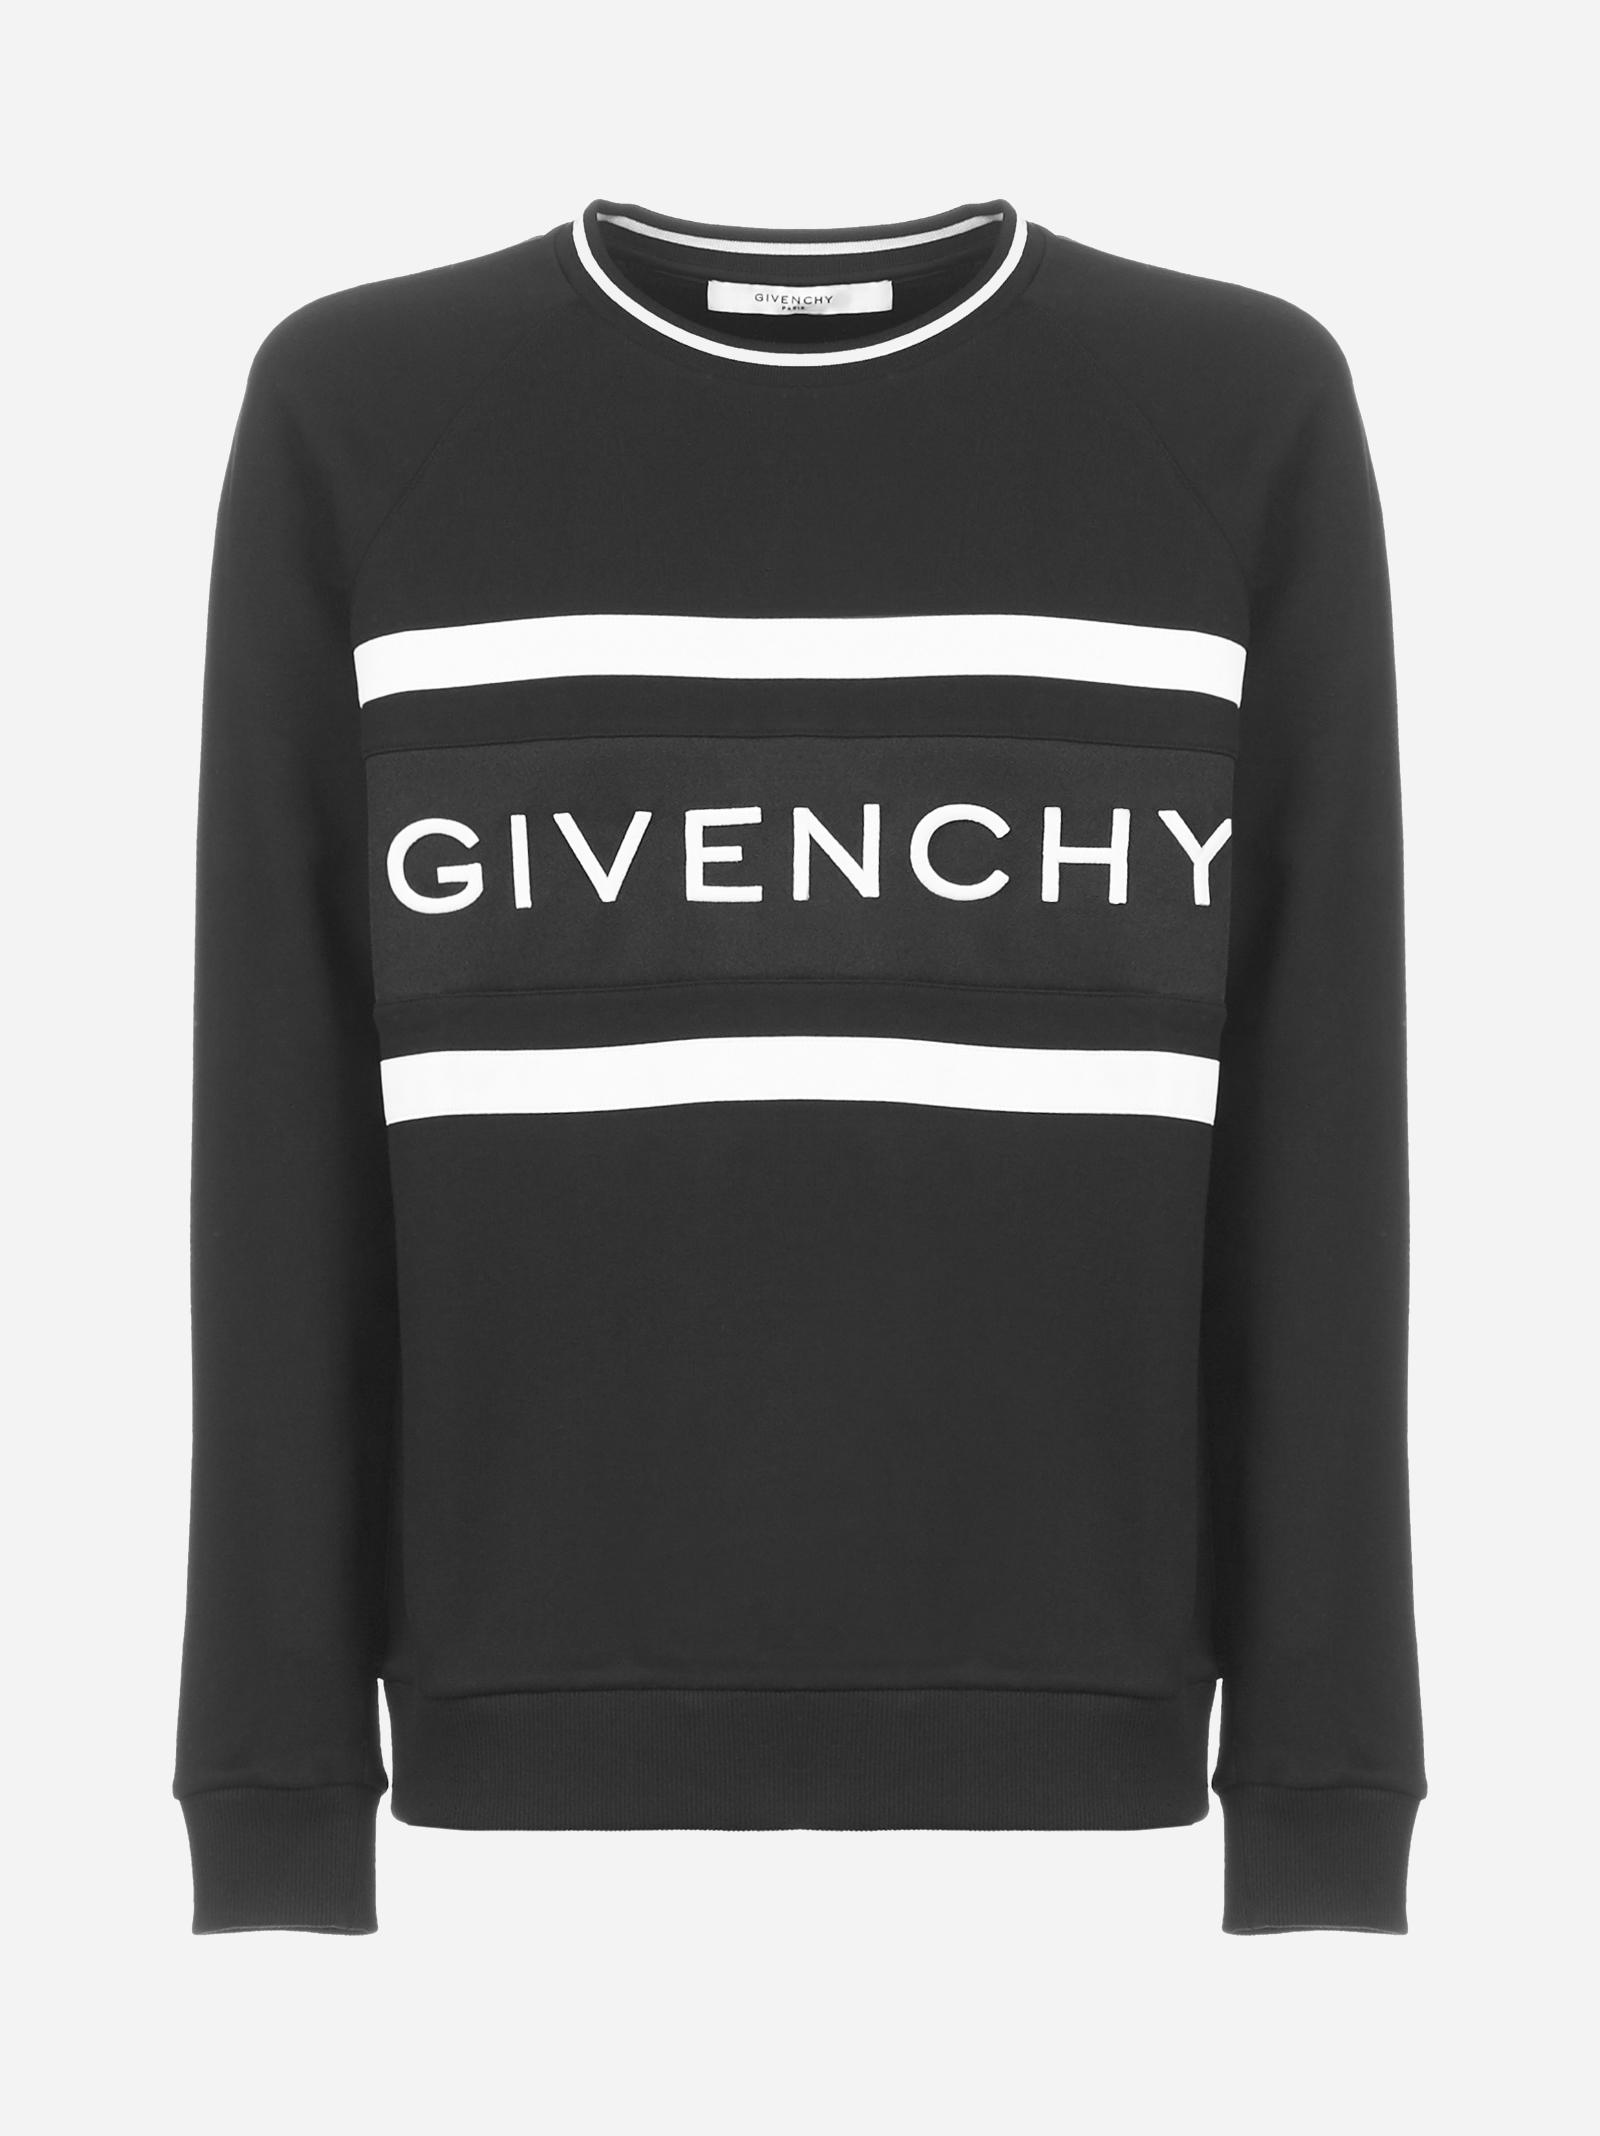 Givenchy Cotton Blend Sweatshirt With Logo in Black for Men - Lyst